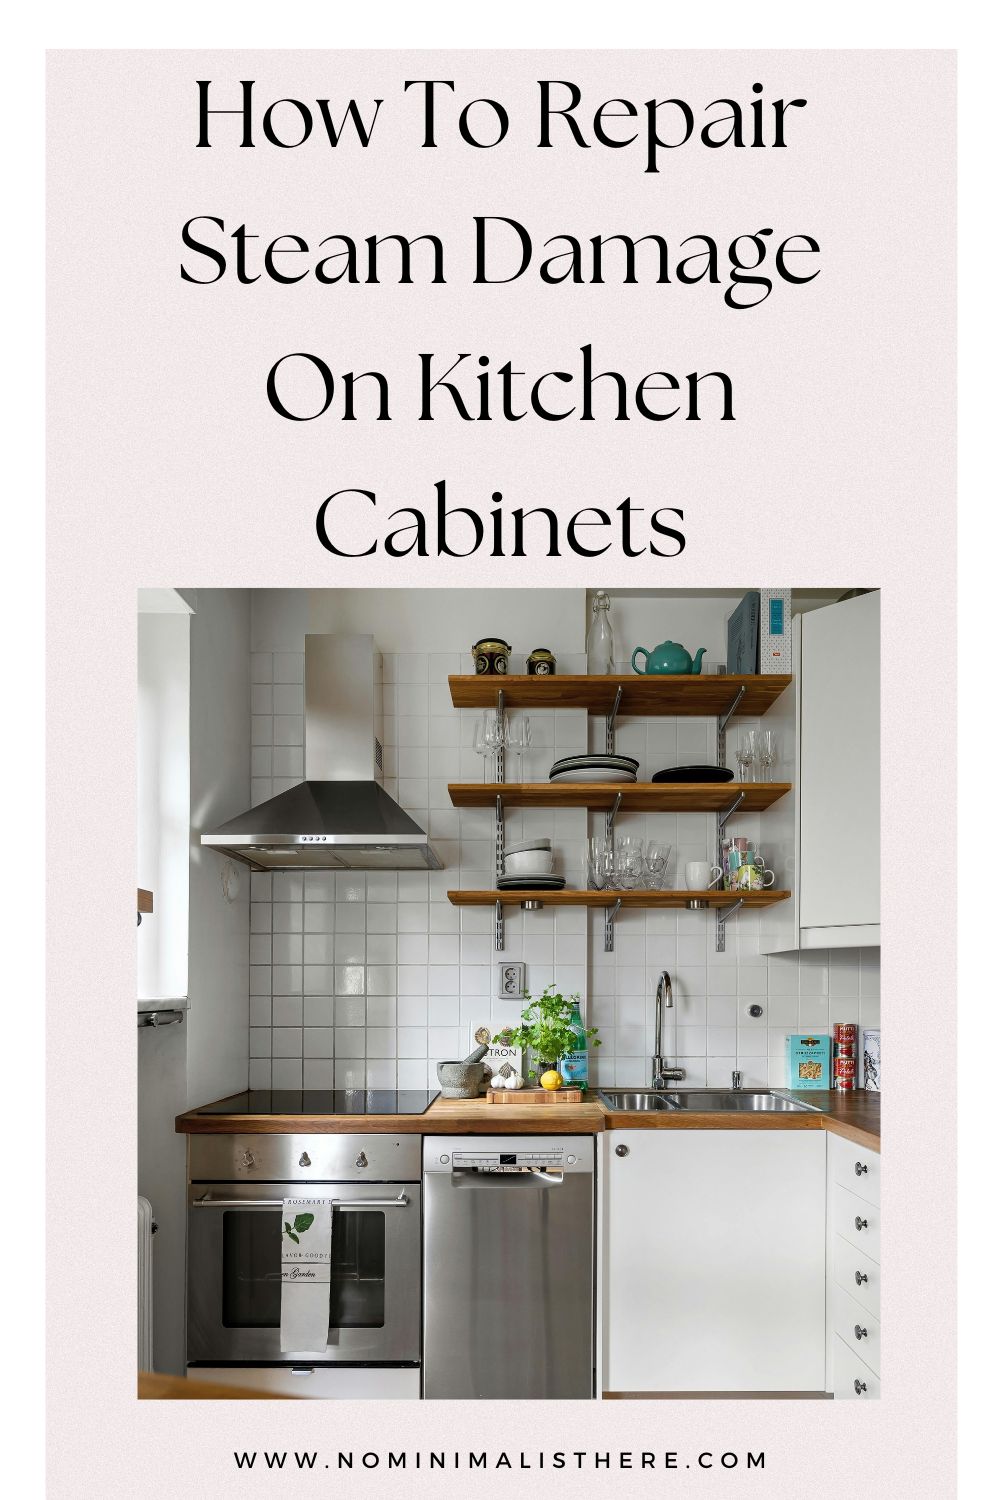 pinterest image about How To Repair Steam Damage On Kitchen Cabinets